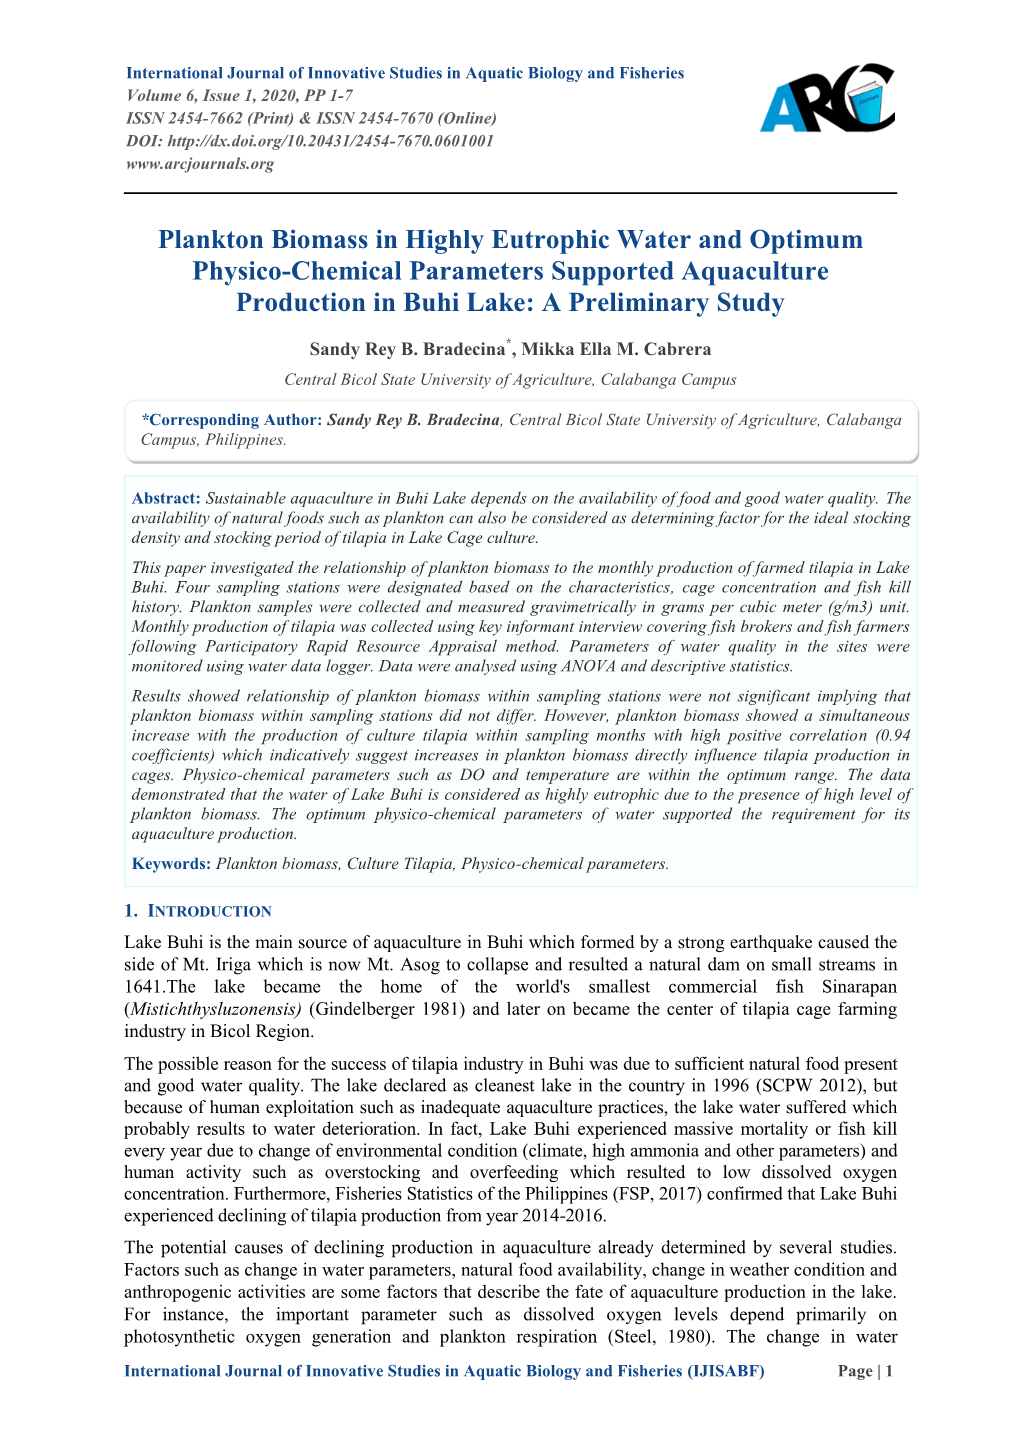 Plankton Biomass in Highly Eutrophic Water and Optimum Physico-Chemical Parameters Supported Aquaculture Production in Buhi Lake: a Preliminary Study